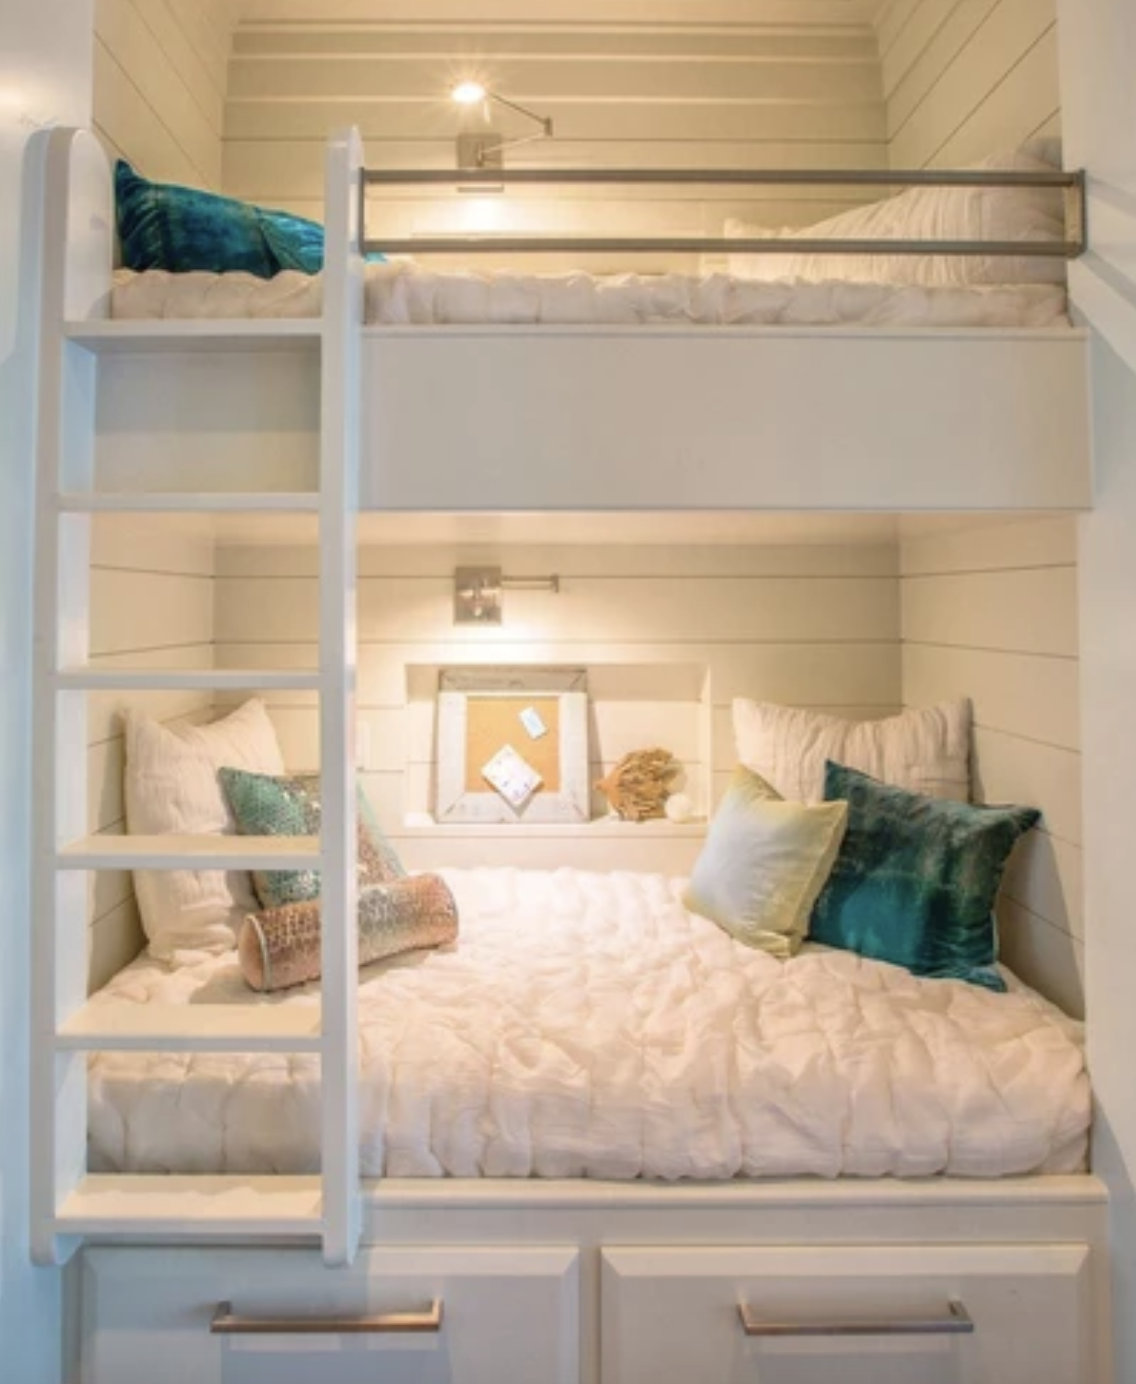 small space bunk beds